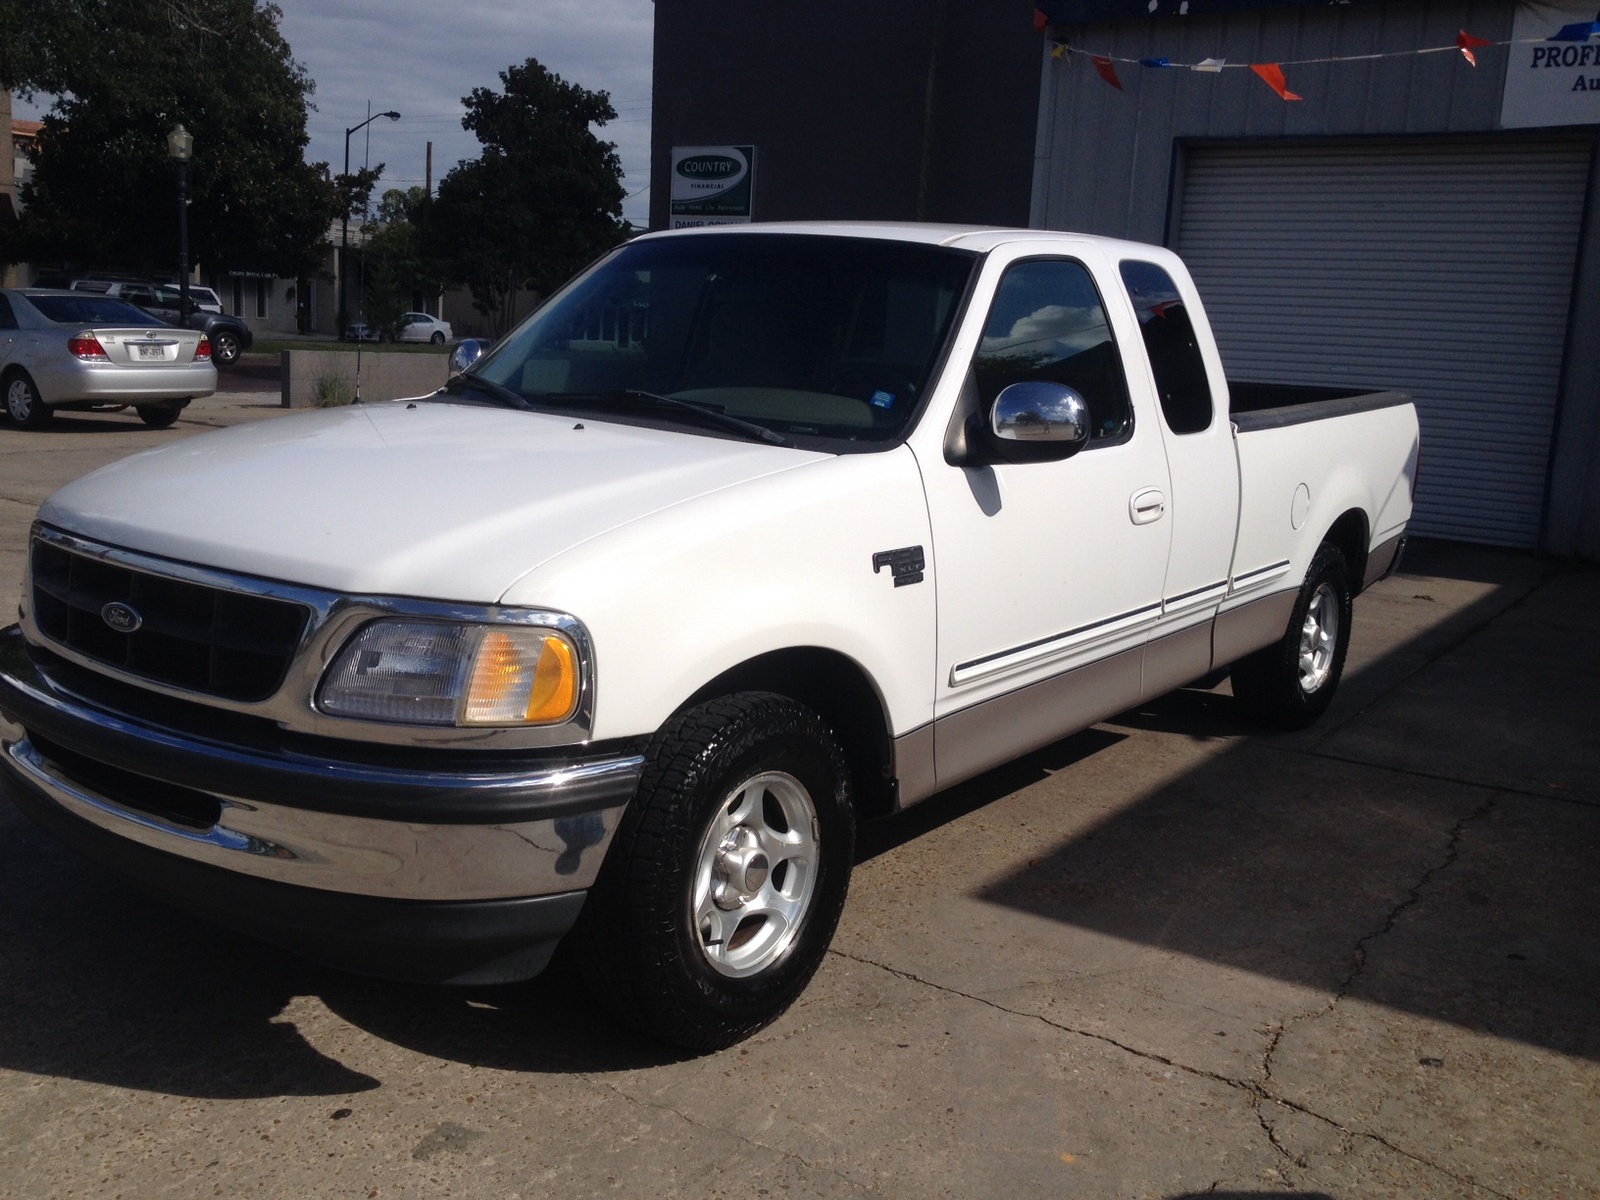 1998 Ford f150 extended cab specs #3